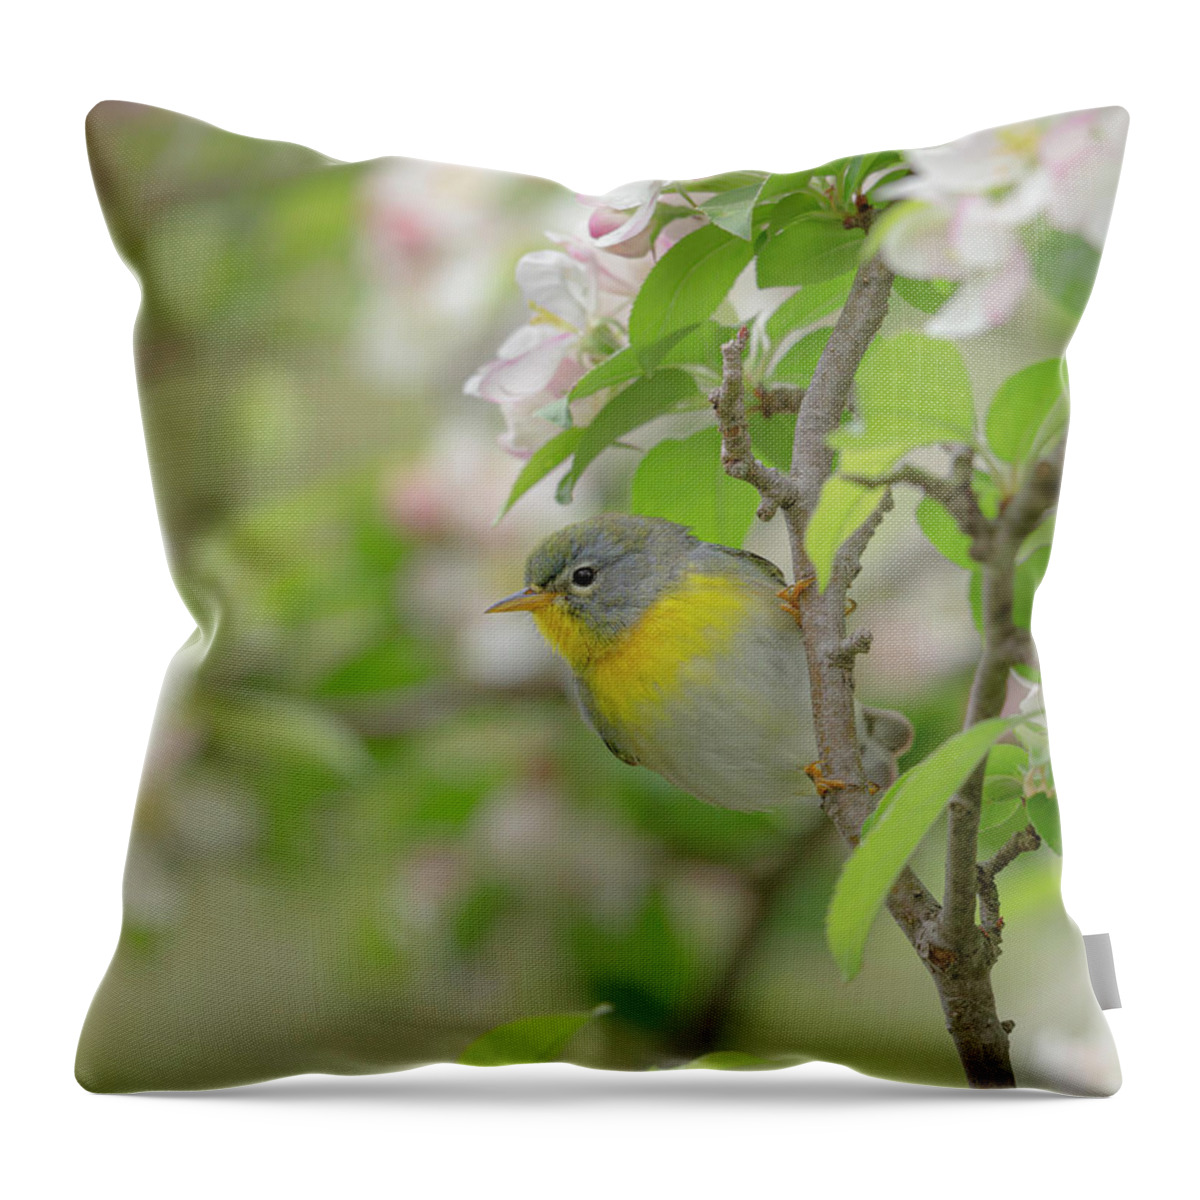 Biggest Week In American Birding Throw Pillow featuring the photograph Springtime by Maresa Pryor-Luzier